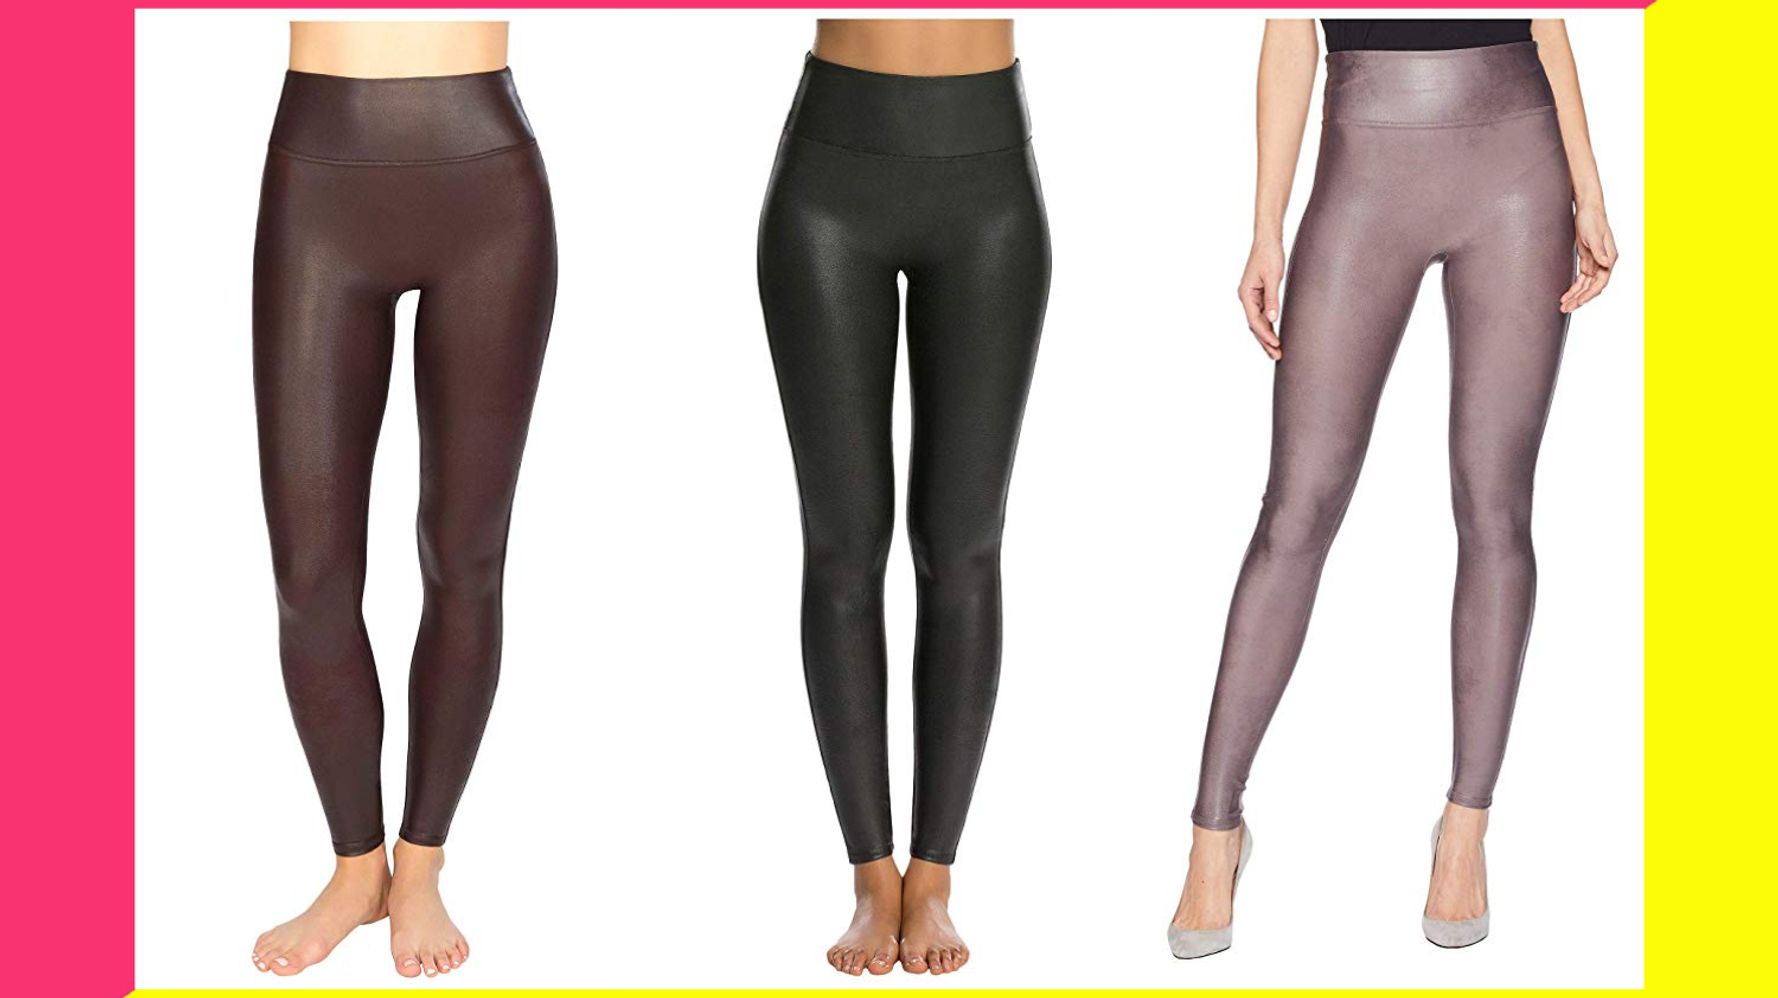 These Comfy Spanx Leggings Are 20% Off for Black Friday